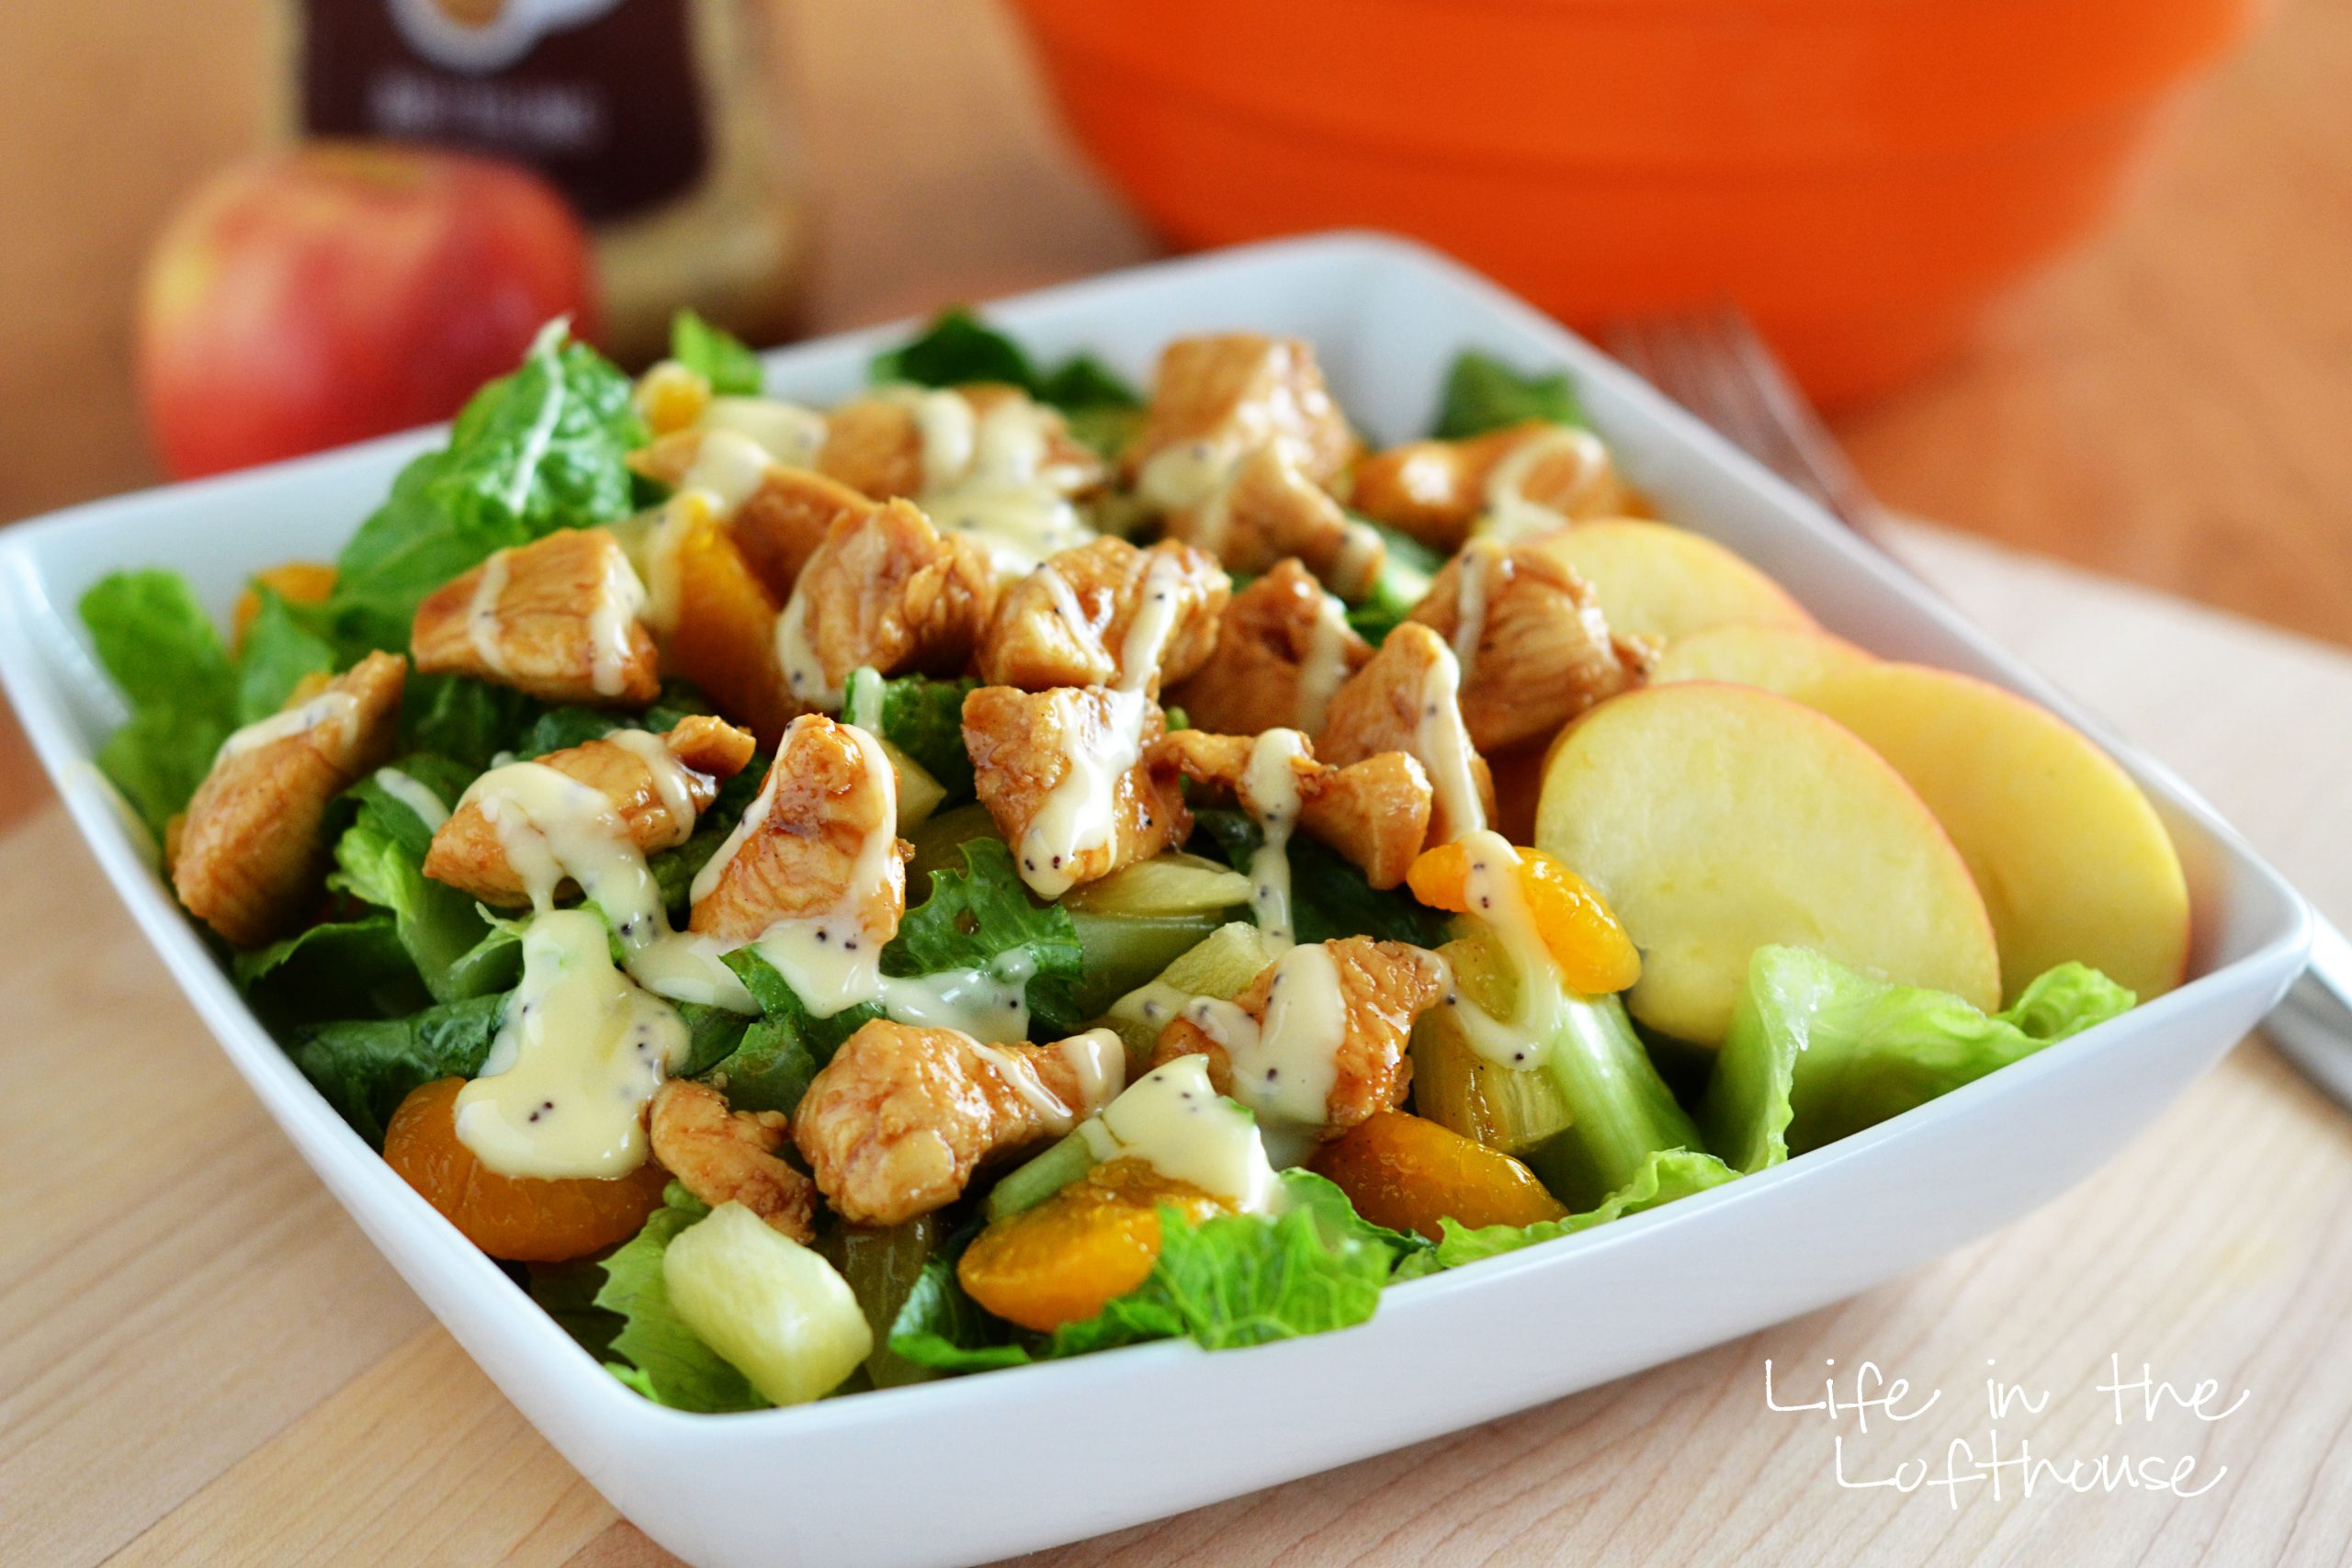 Asian Chicken Salad has romaine lettuce, pineapple, mandarin oranges, sliced apples, marinated chicken, sliced almonds and a drizzle of creamy poppy seed dressing. Life-in-the-Lofthouse.com